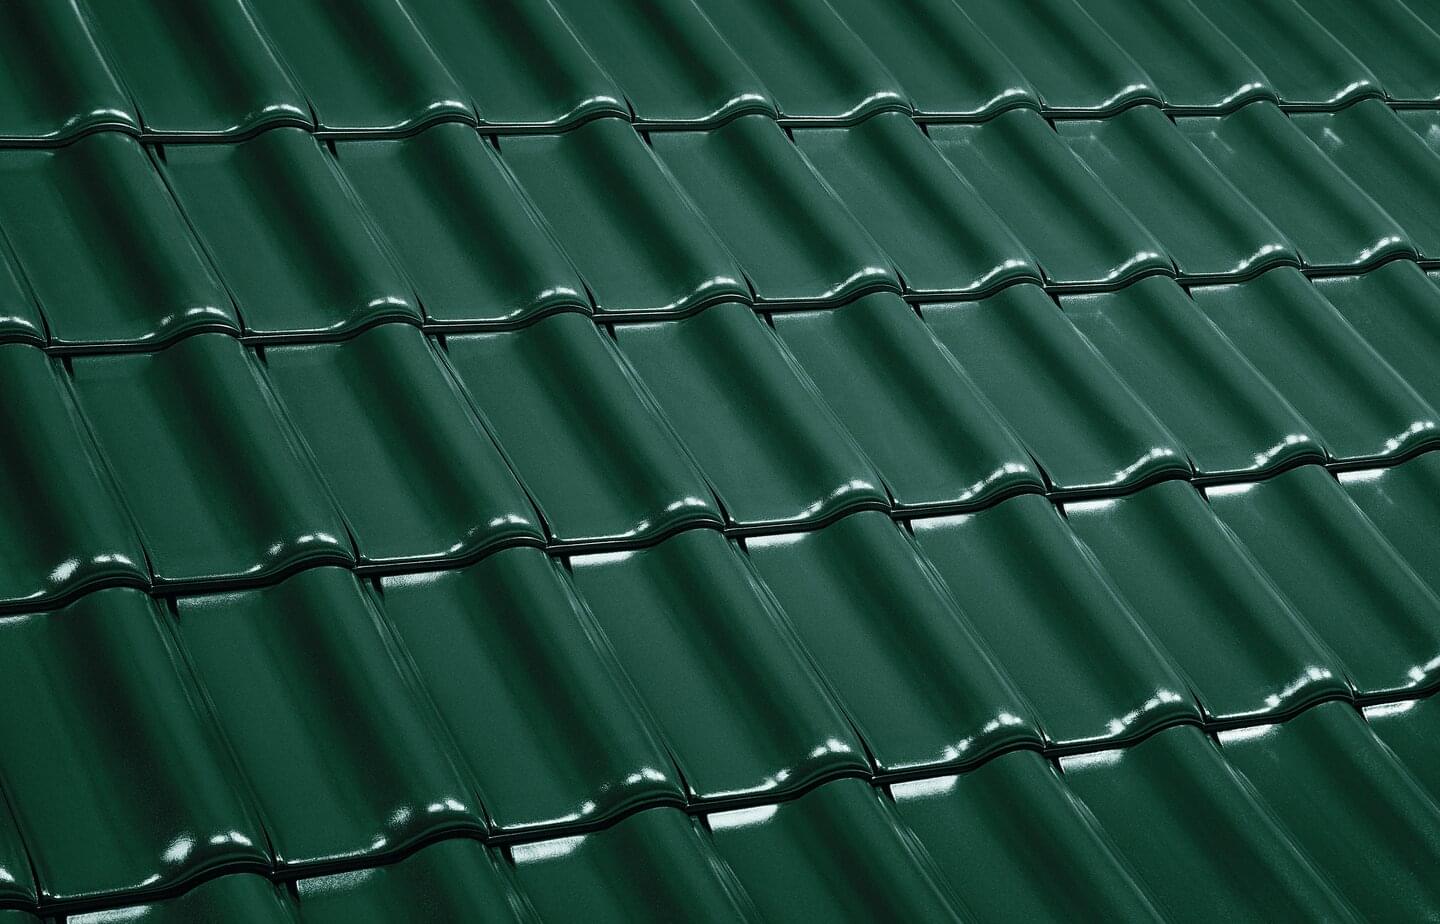 E 58 MAX® - Royal green | Image roof surface | © © ERLUS AG 2021